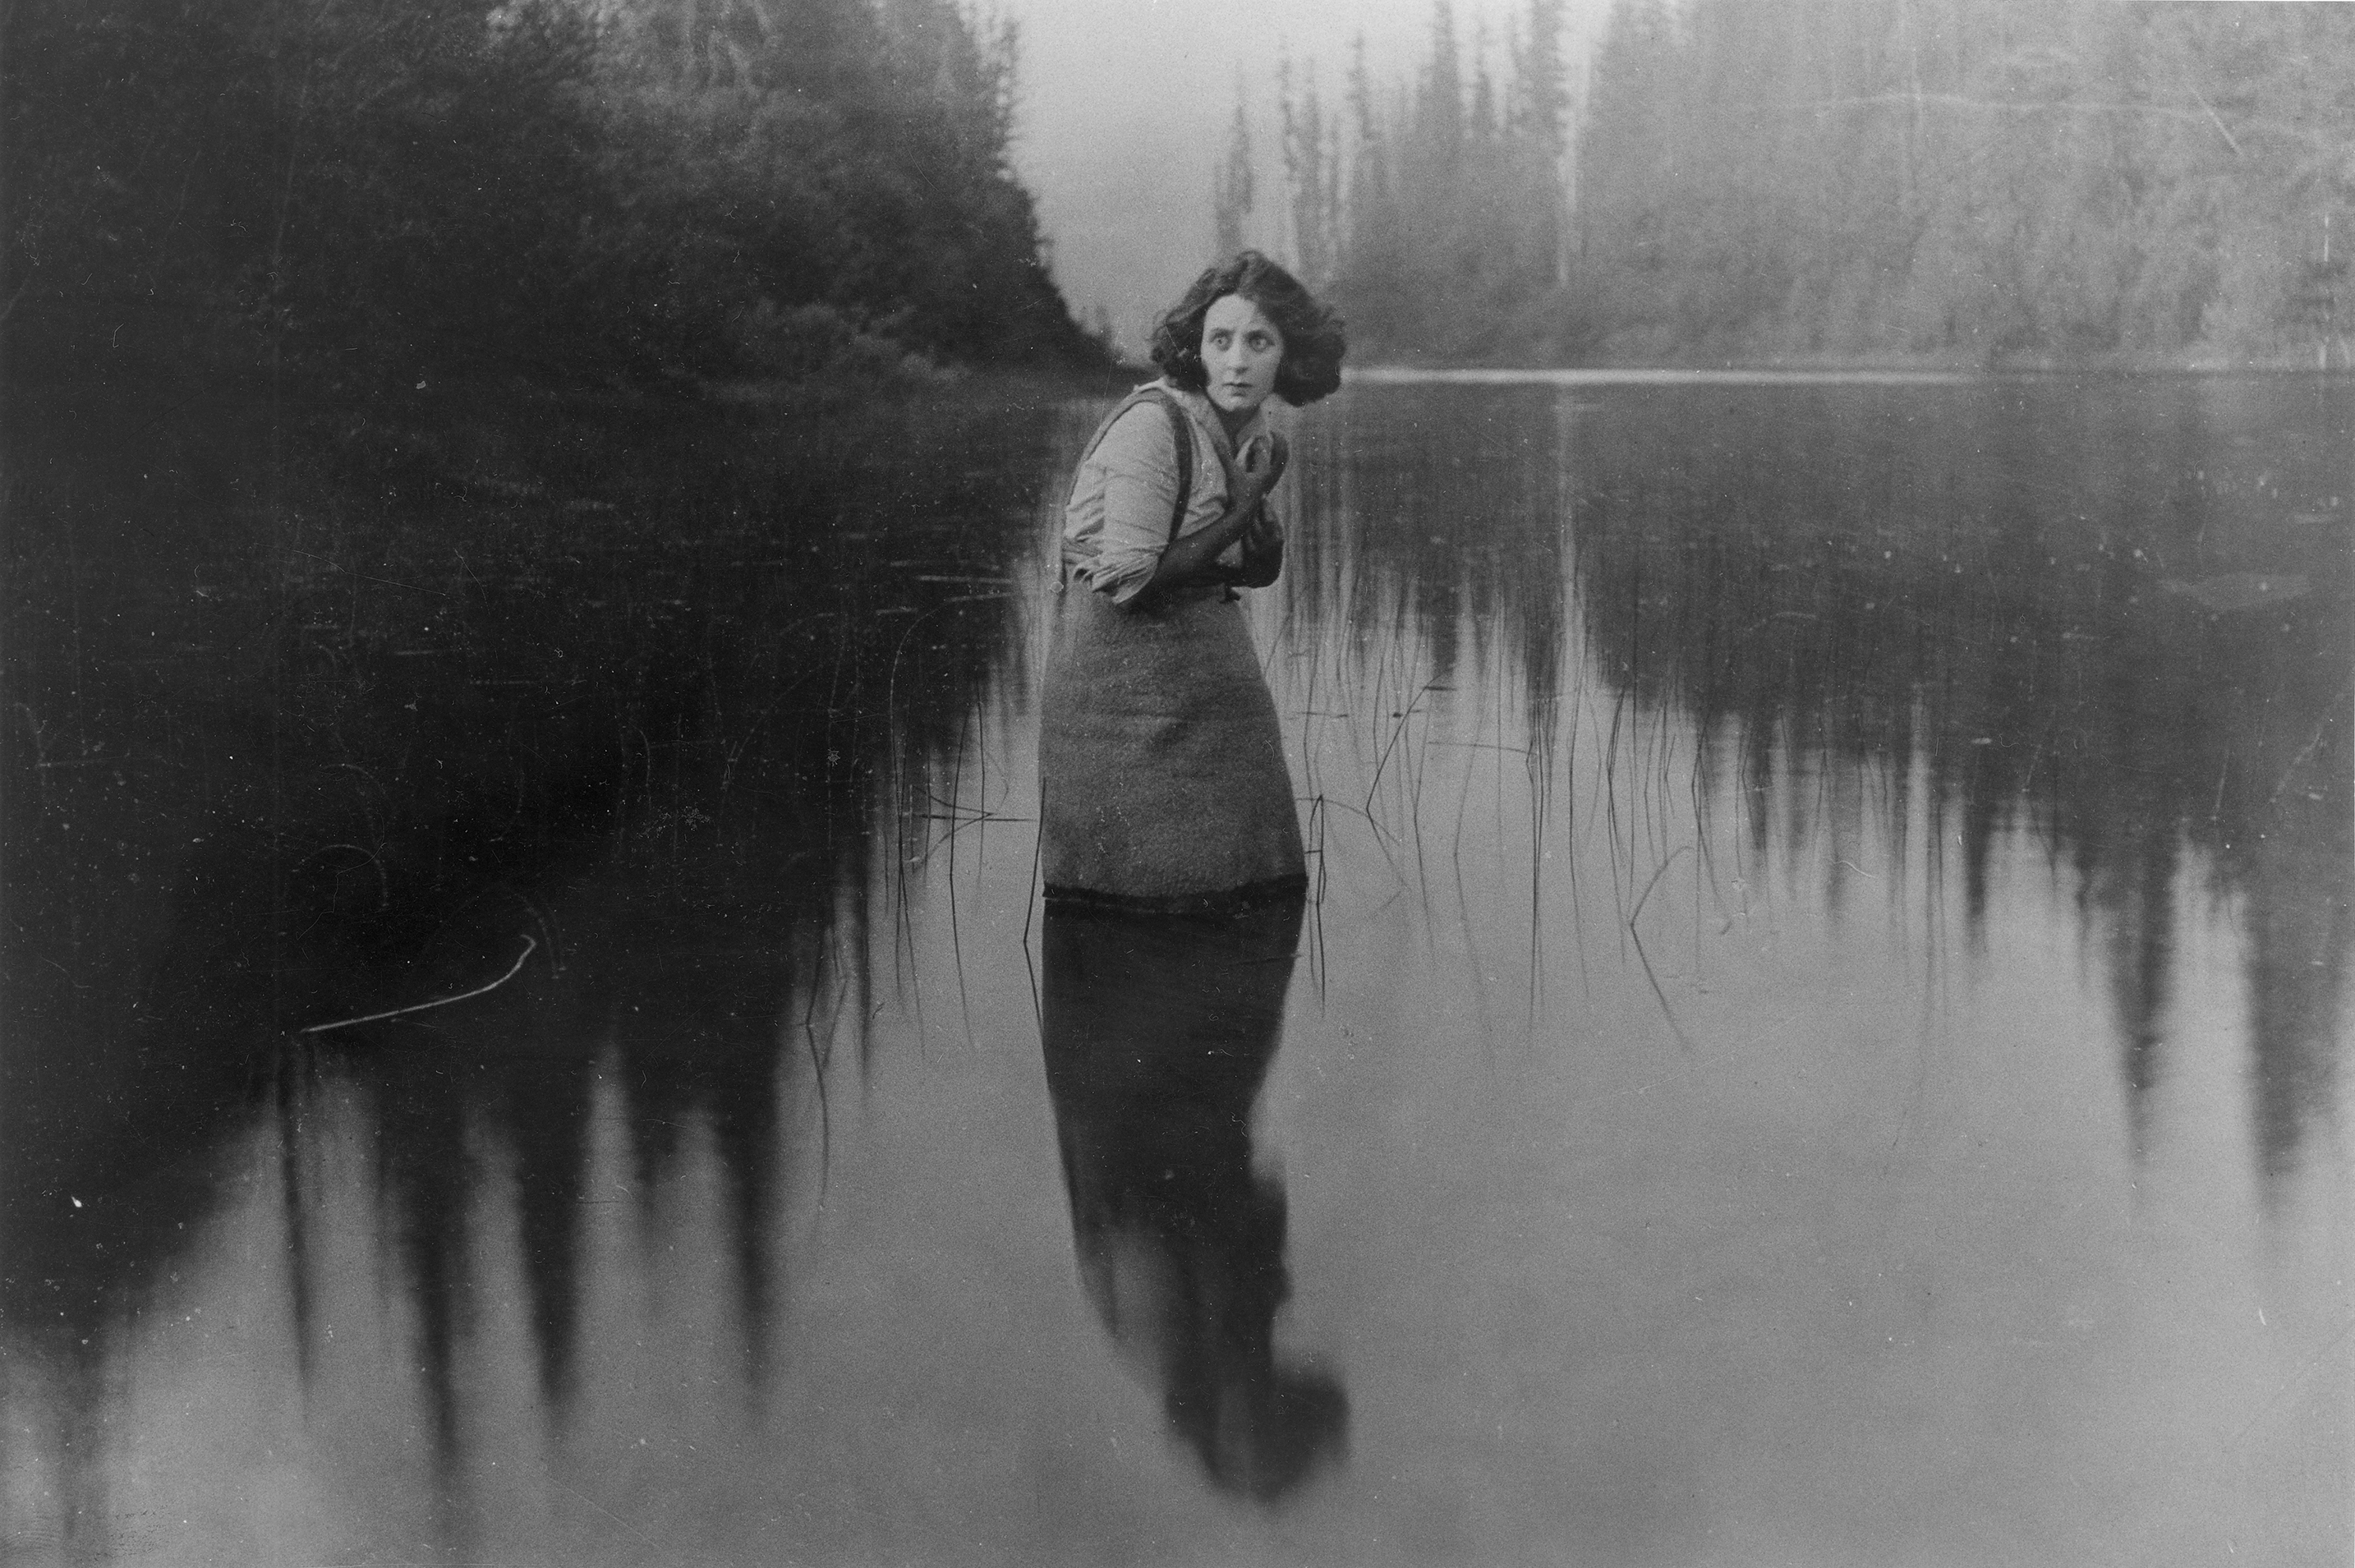 Nell Shipman standing in a shallow lake in a forrest